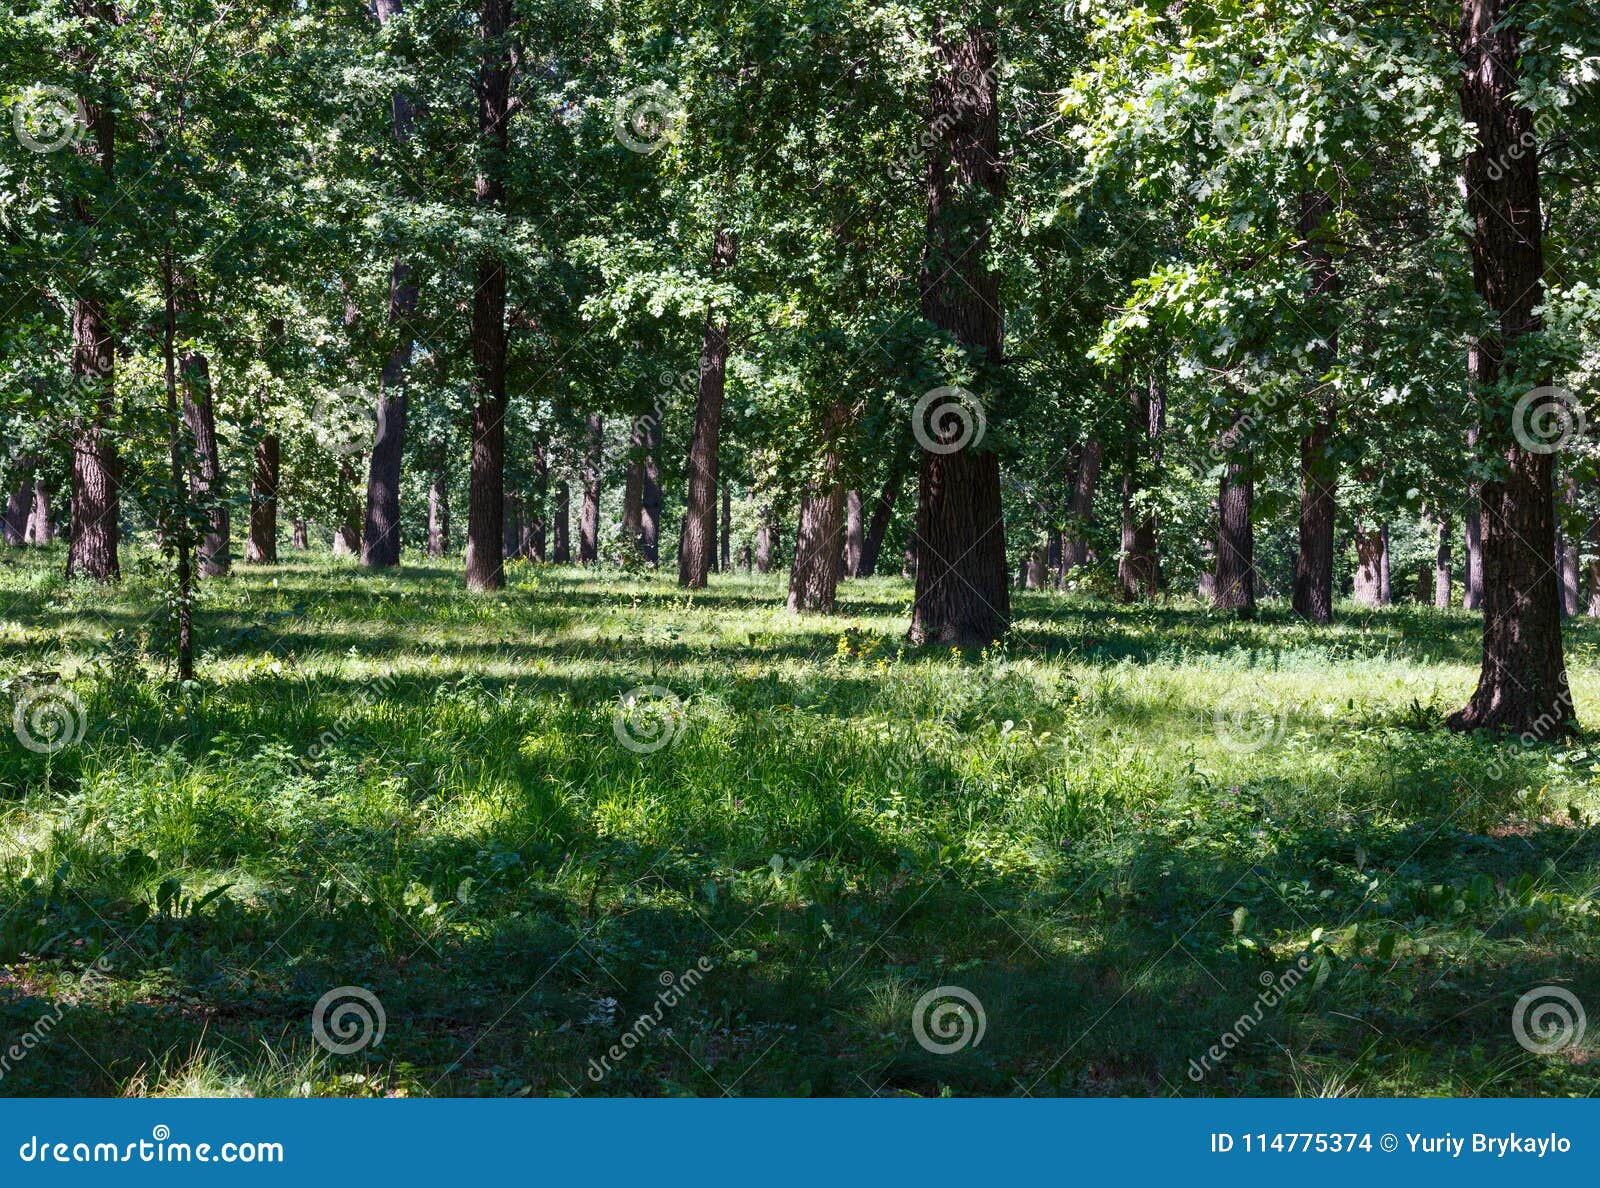 Oak Trees in Summer Green Grassy Park Stock Photo - Image of green ...